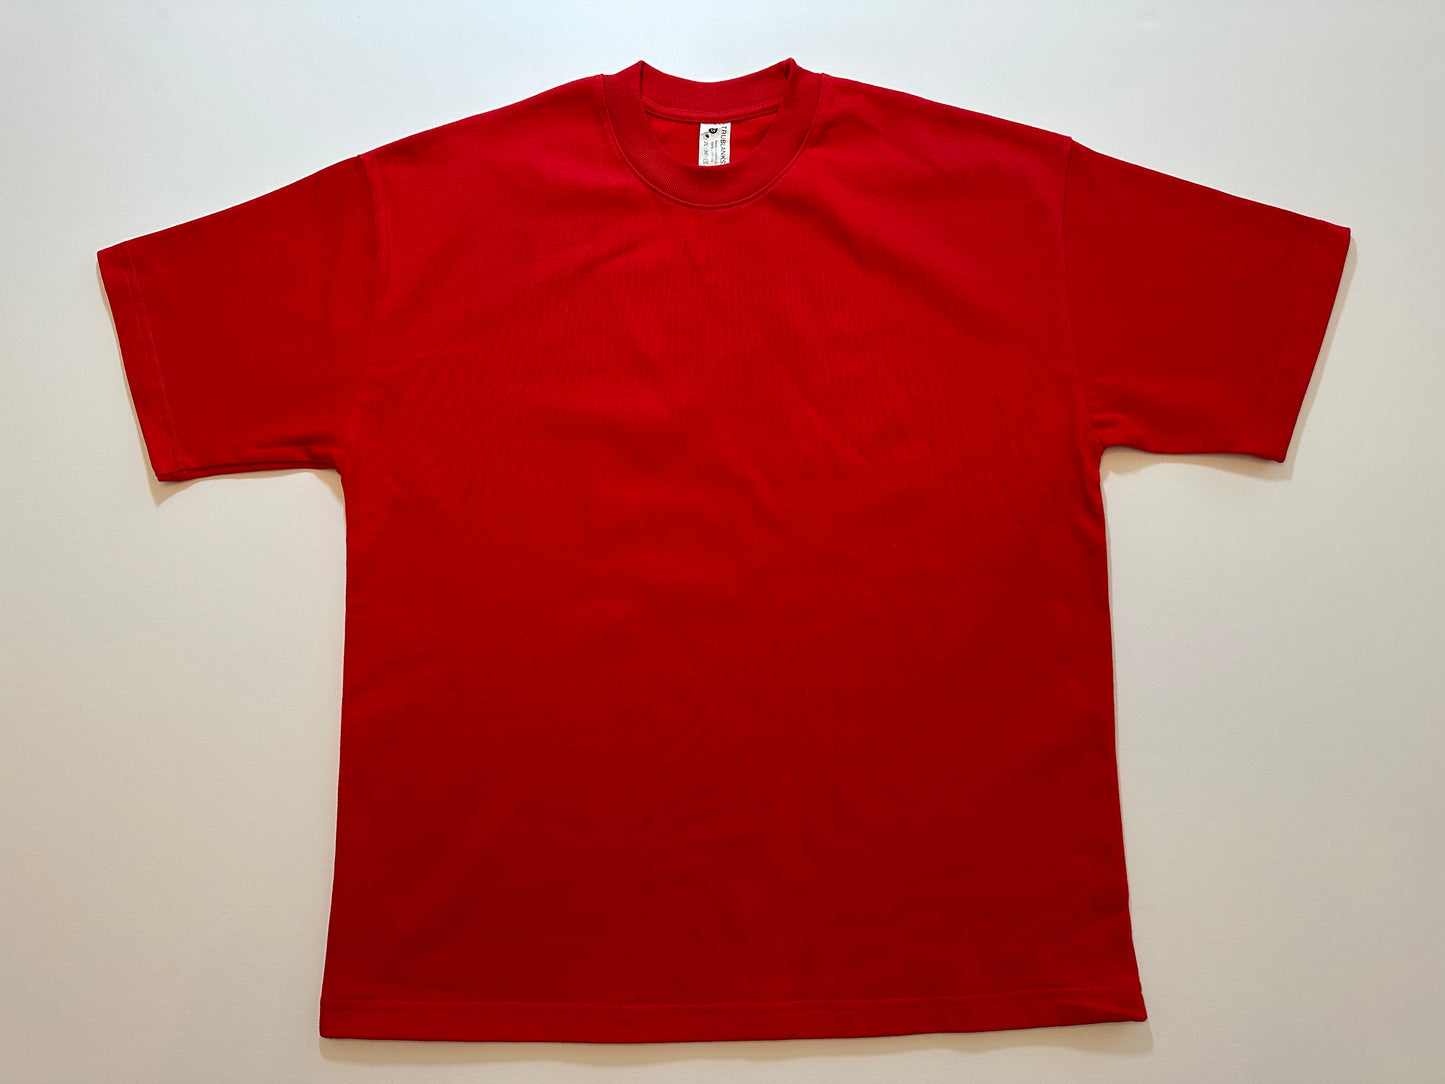 100% Cotton 330GSM(10 Ounces) Oversized Solid Tee